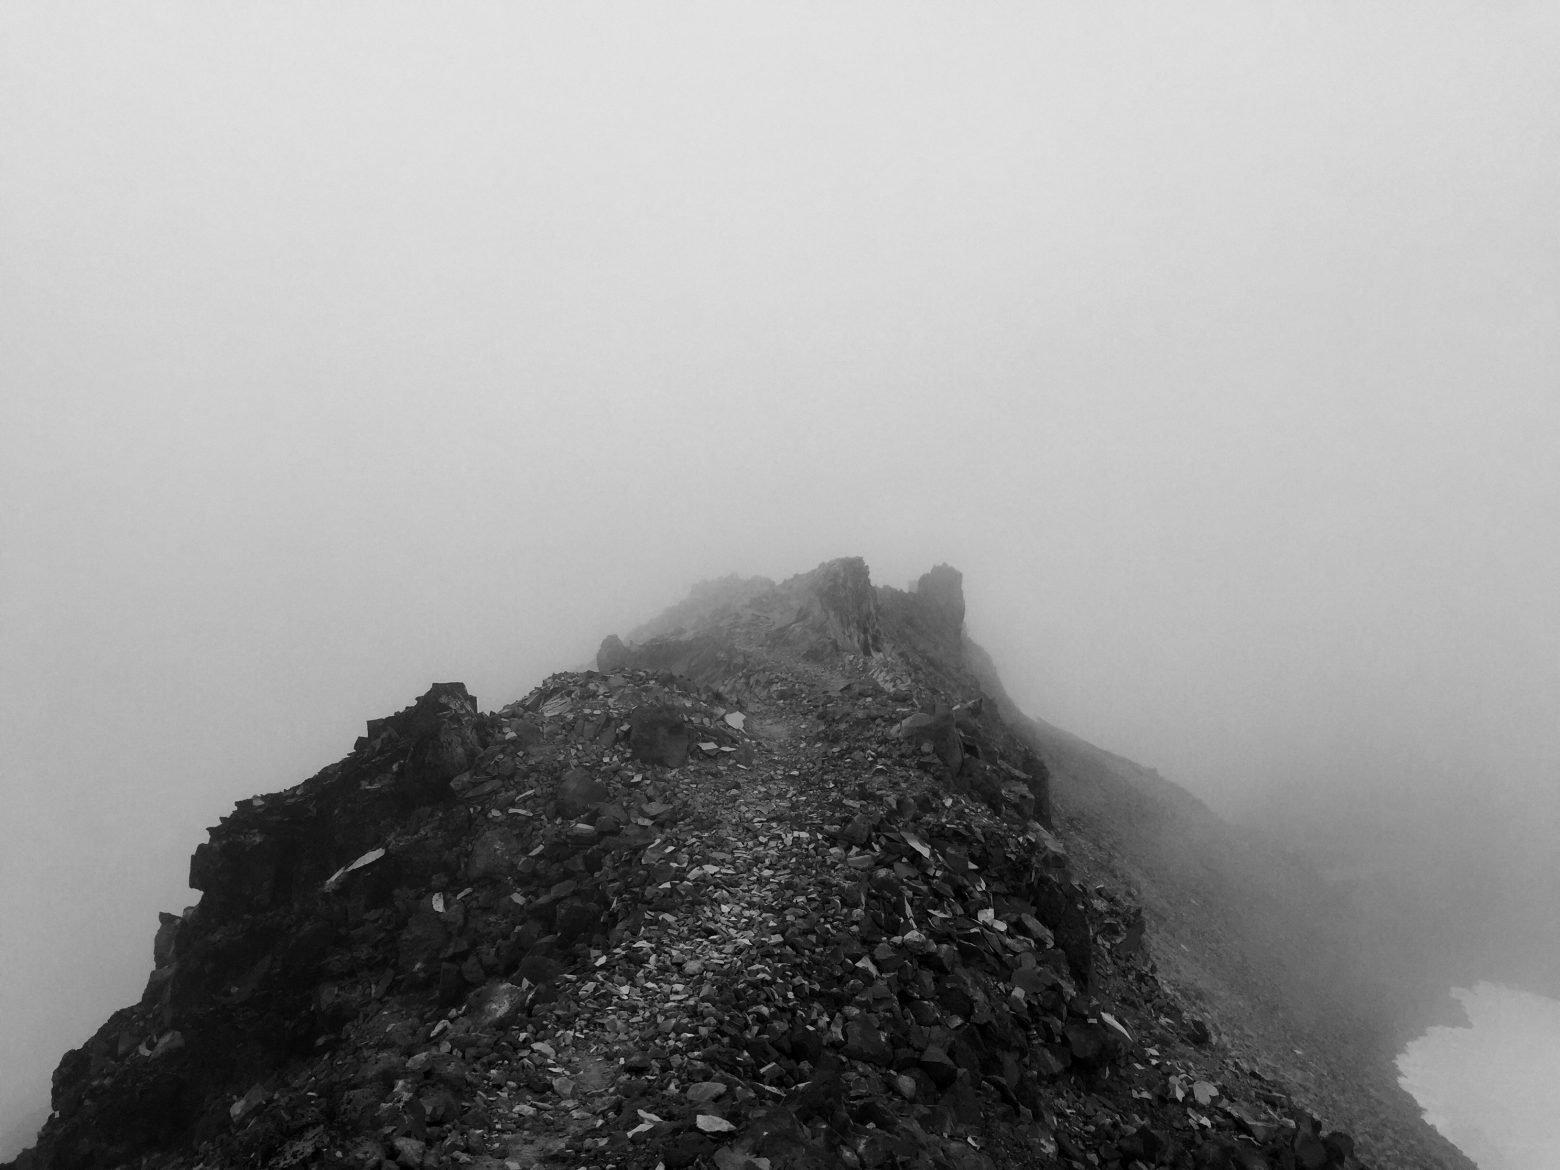 Rocky trail through the clouds on the Knifes Edge